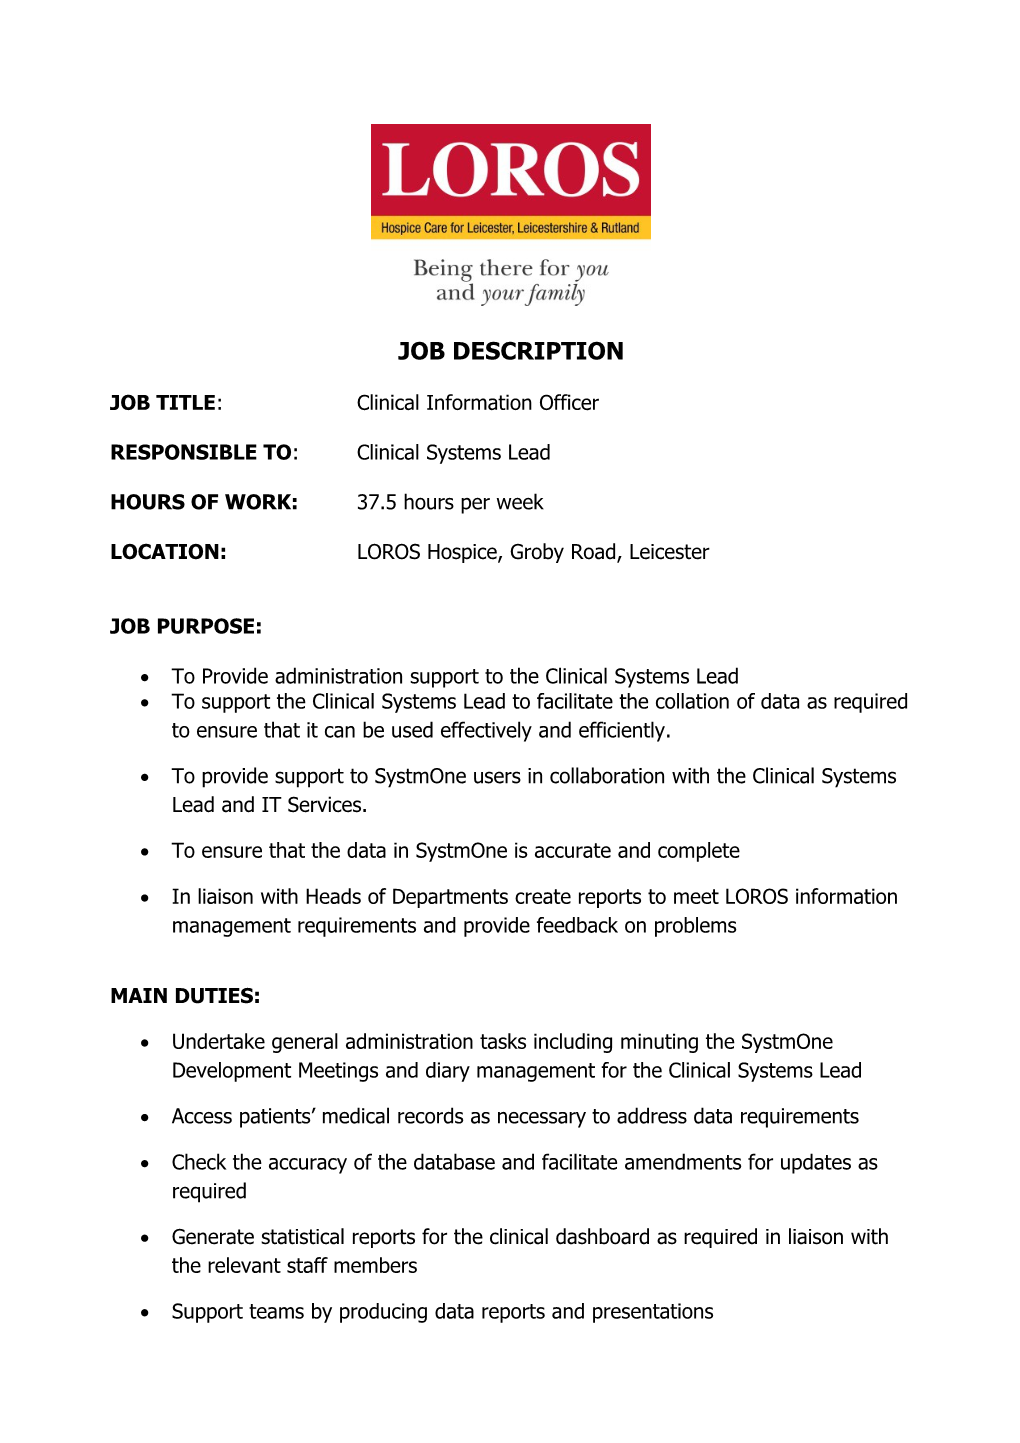 JOB TITLE:Clinical Information Officer